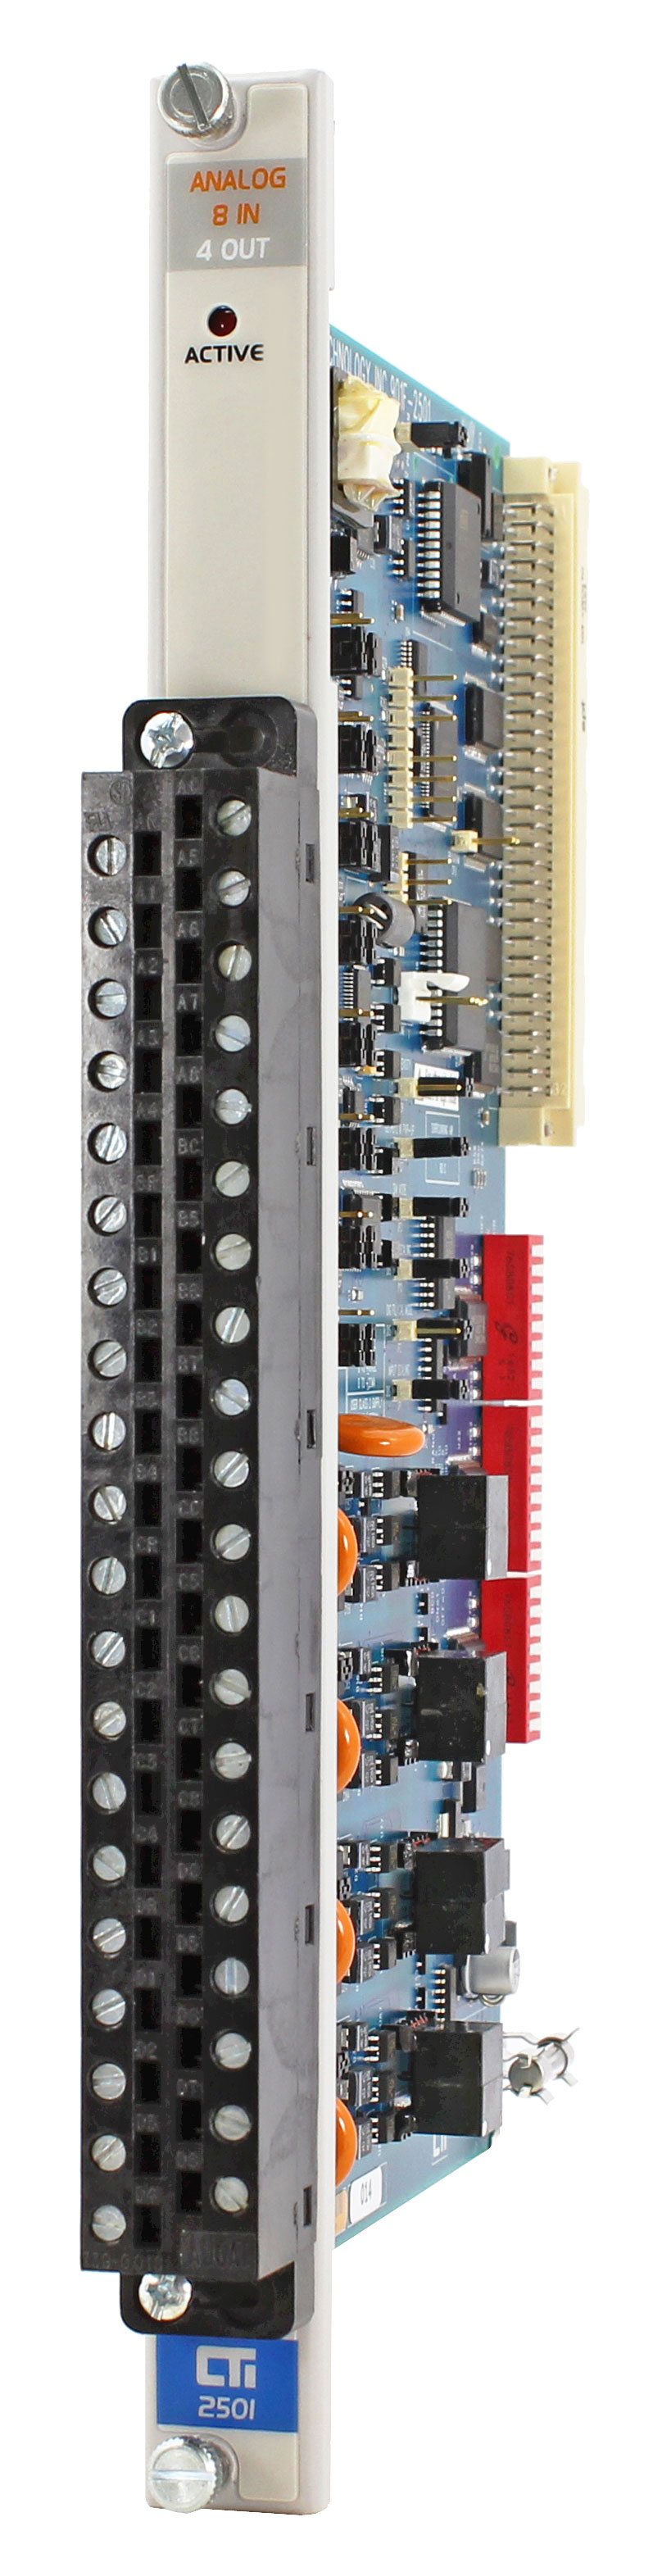 2501 8in/4out Analog Module